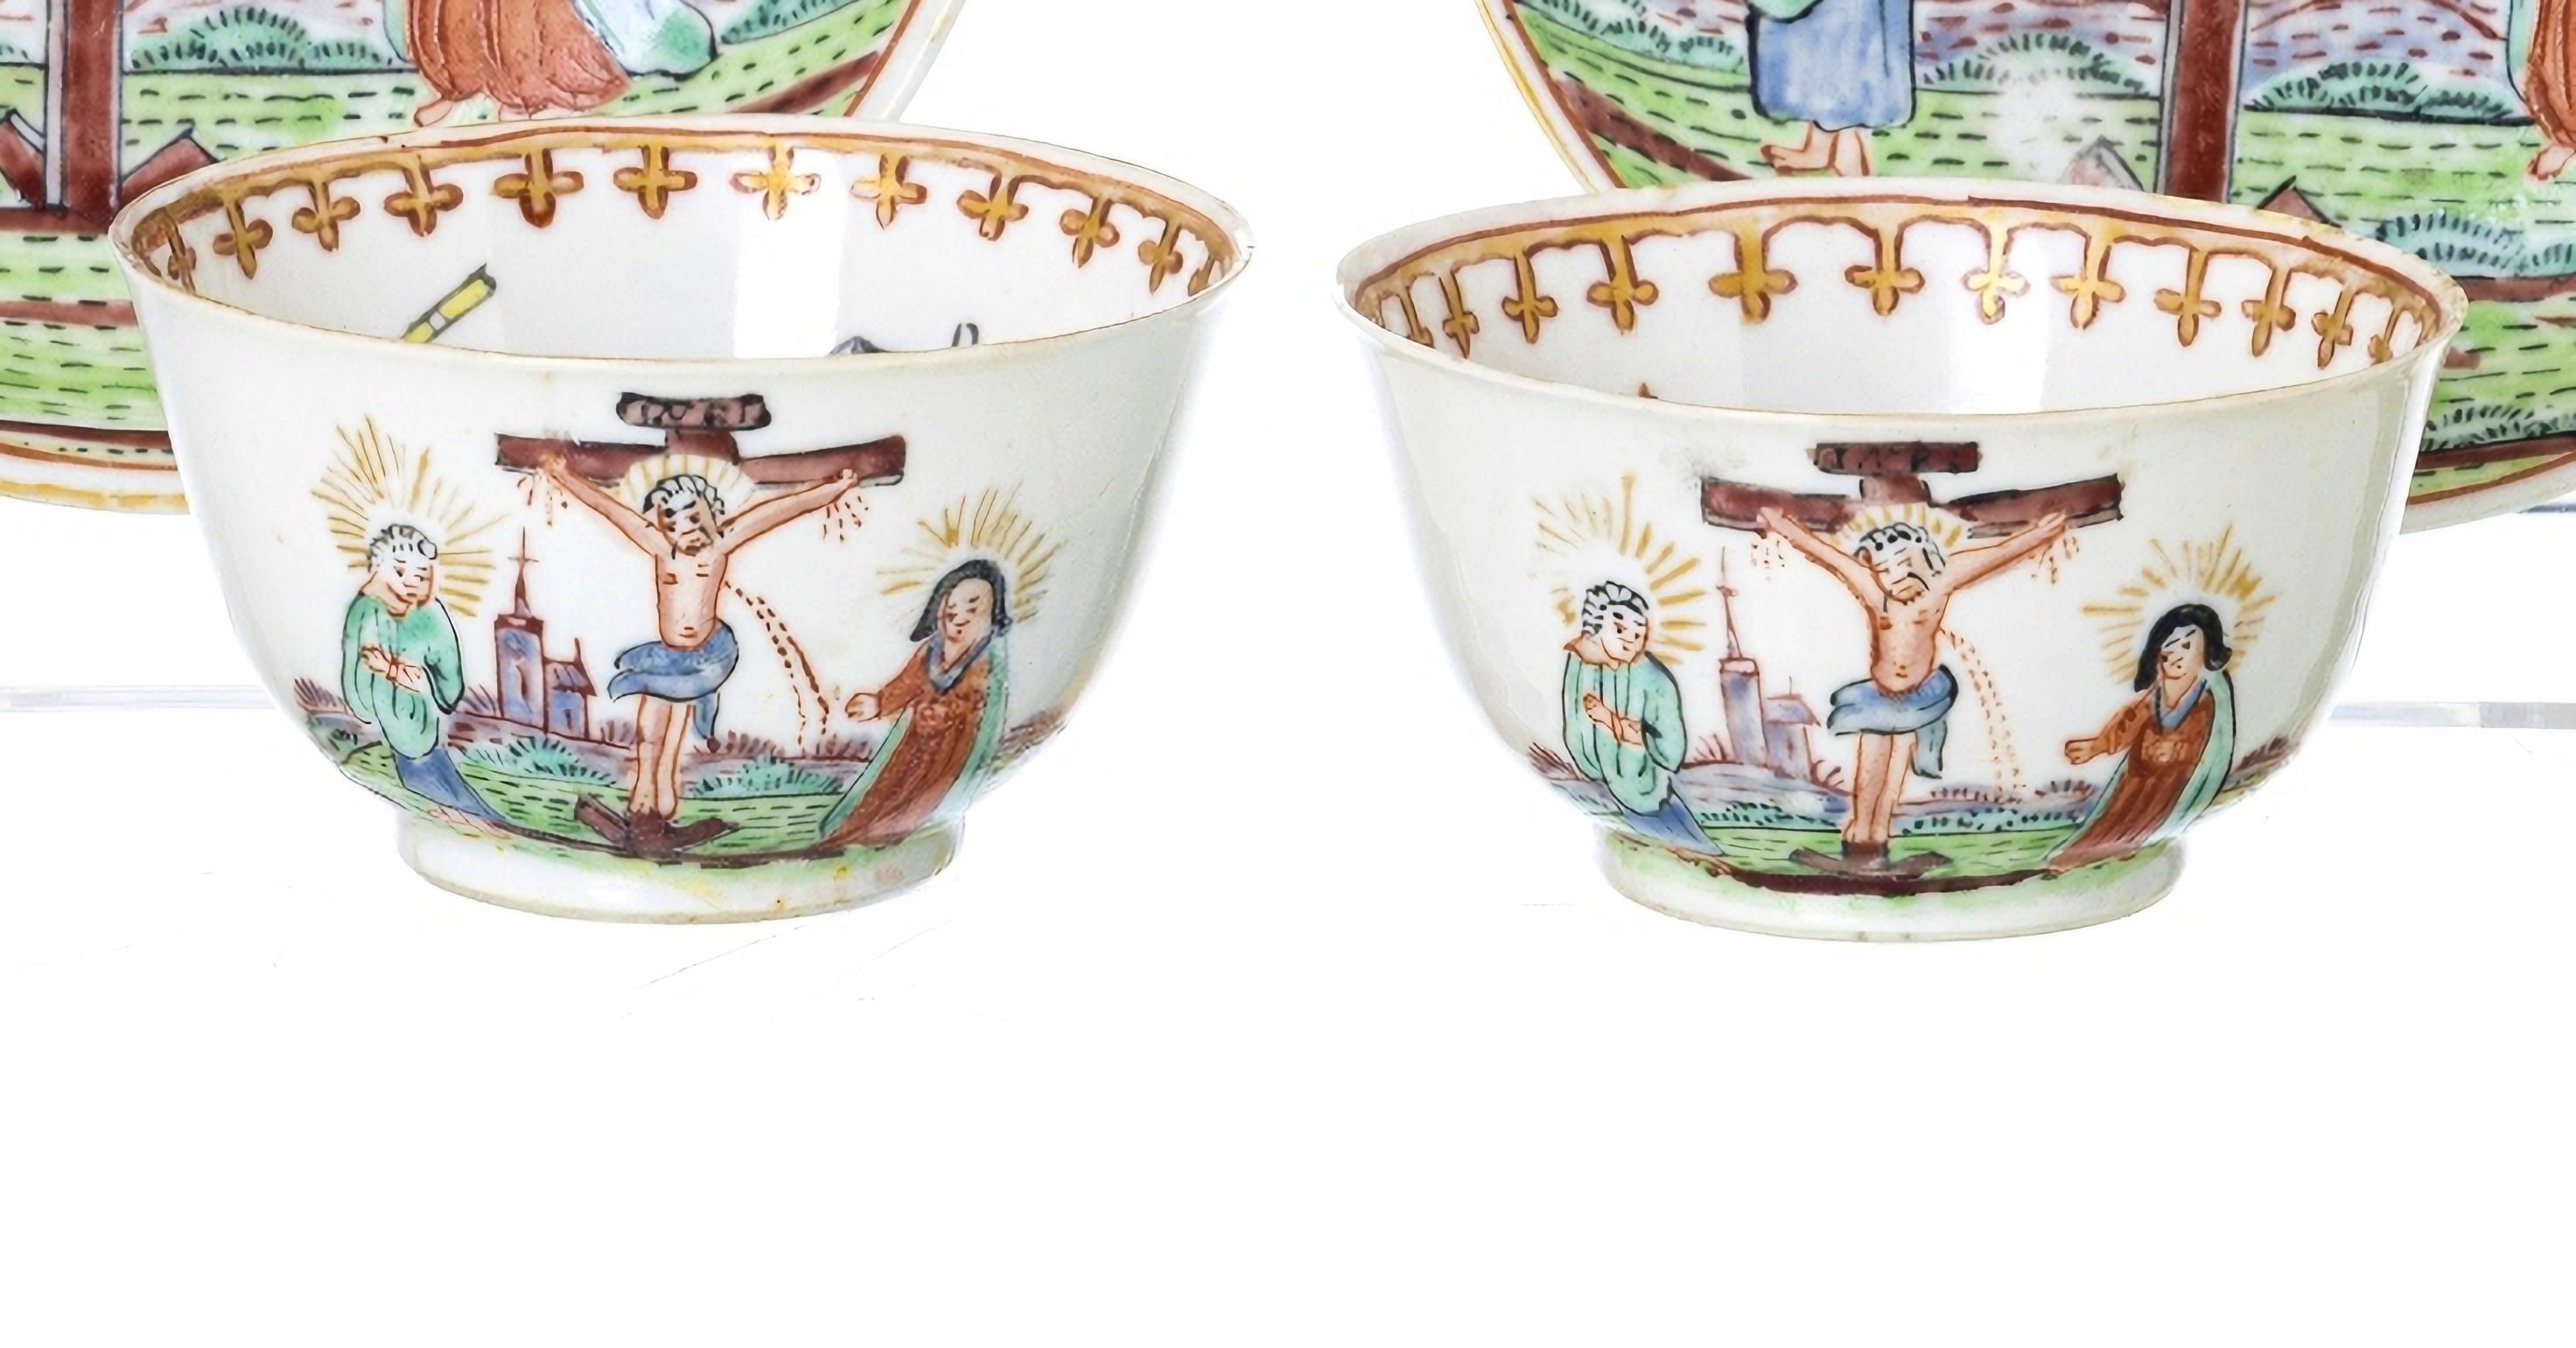 PAIR OF CUPS WITH SAUCER 18th century

Chinese export porcelain, Qianlong reign (1736-1795).
Decoration in famille rose and gold tones representing the crucifixion of Christ.
Jorge Welsh London Antiquary Label
Dim.: 5 x 11 cm
good conditions